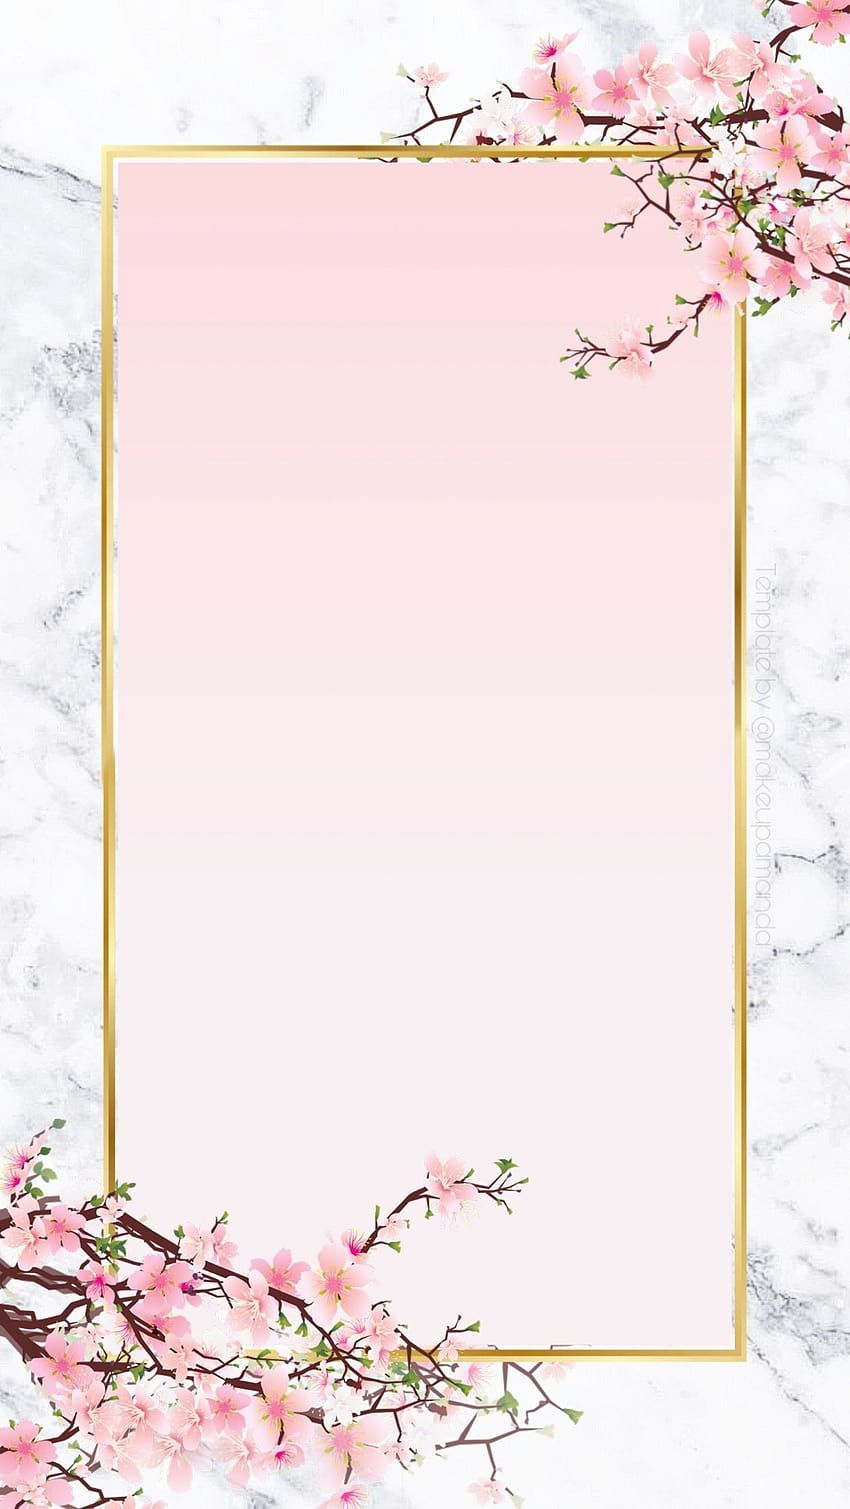 Pink cherry blossom branch with a gold frame on a marble background - Border